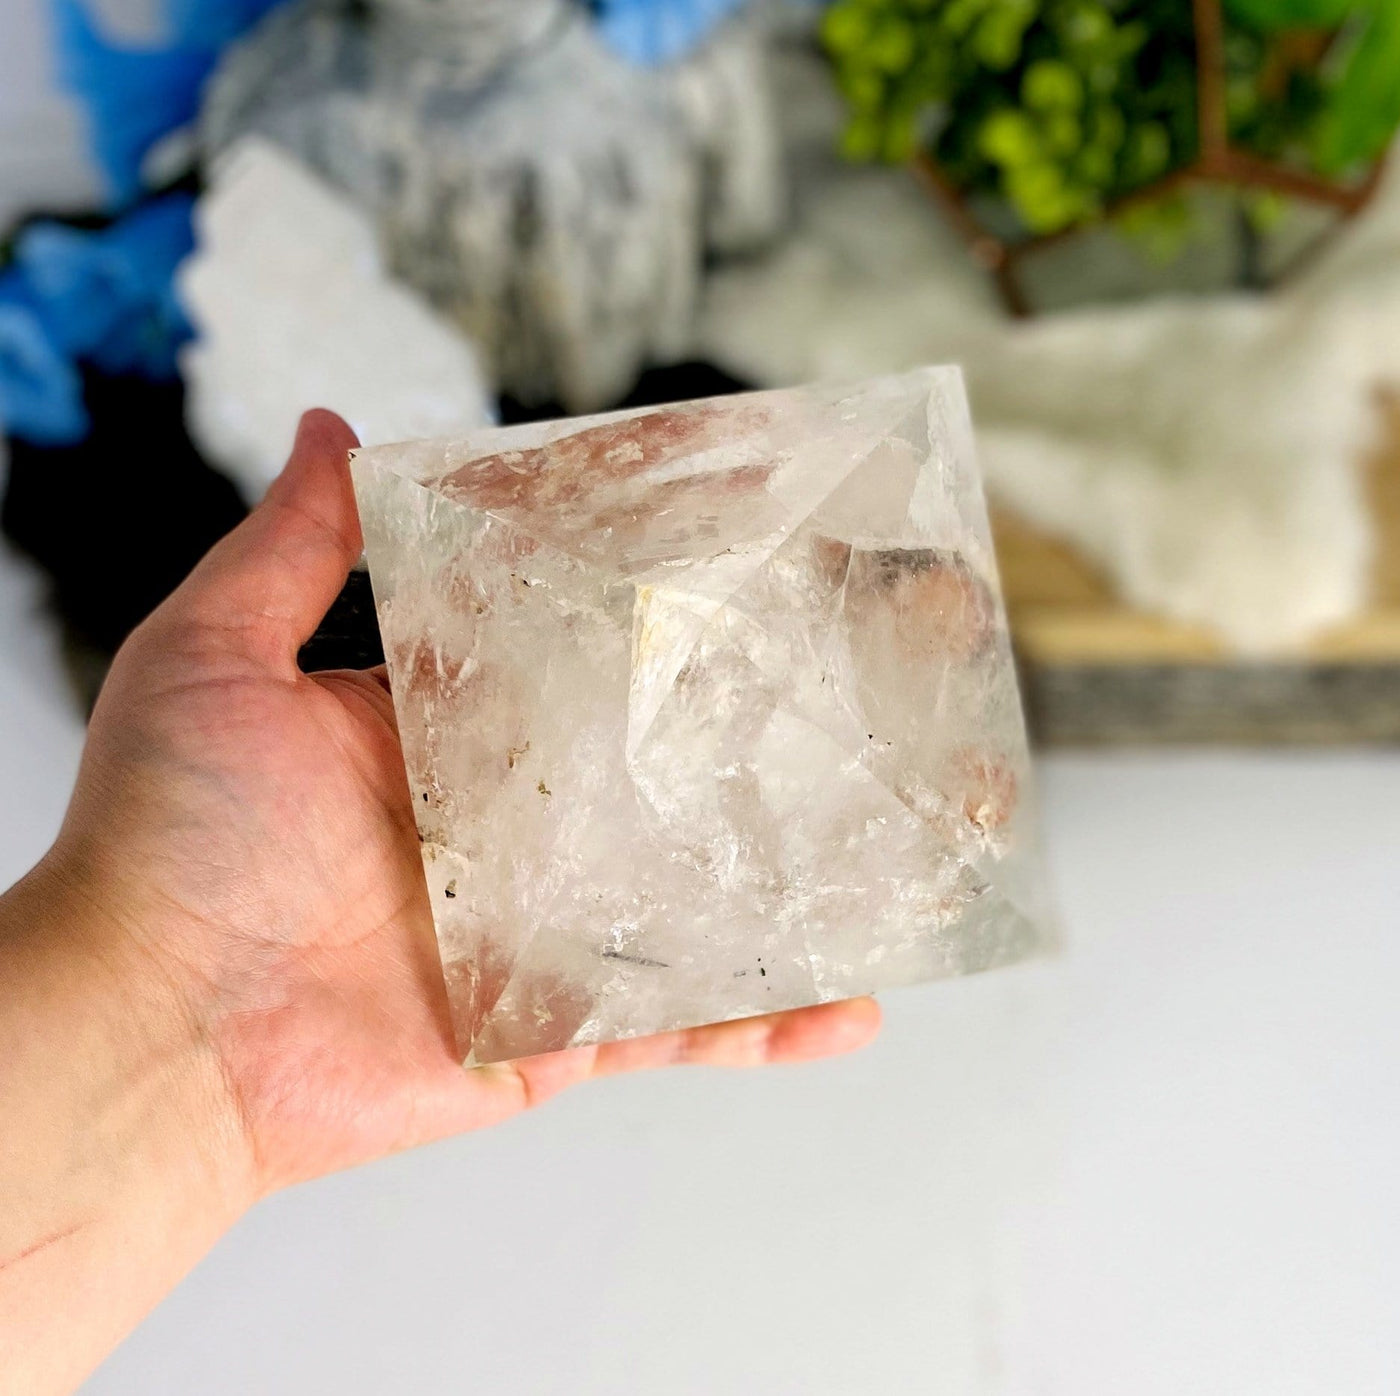 hand holding up Crystal Quartz Pyramid with decorations in the background